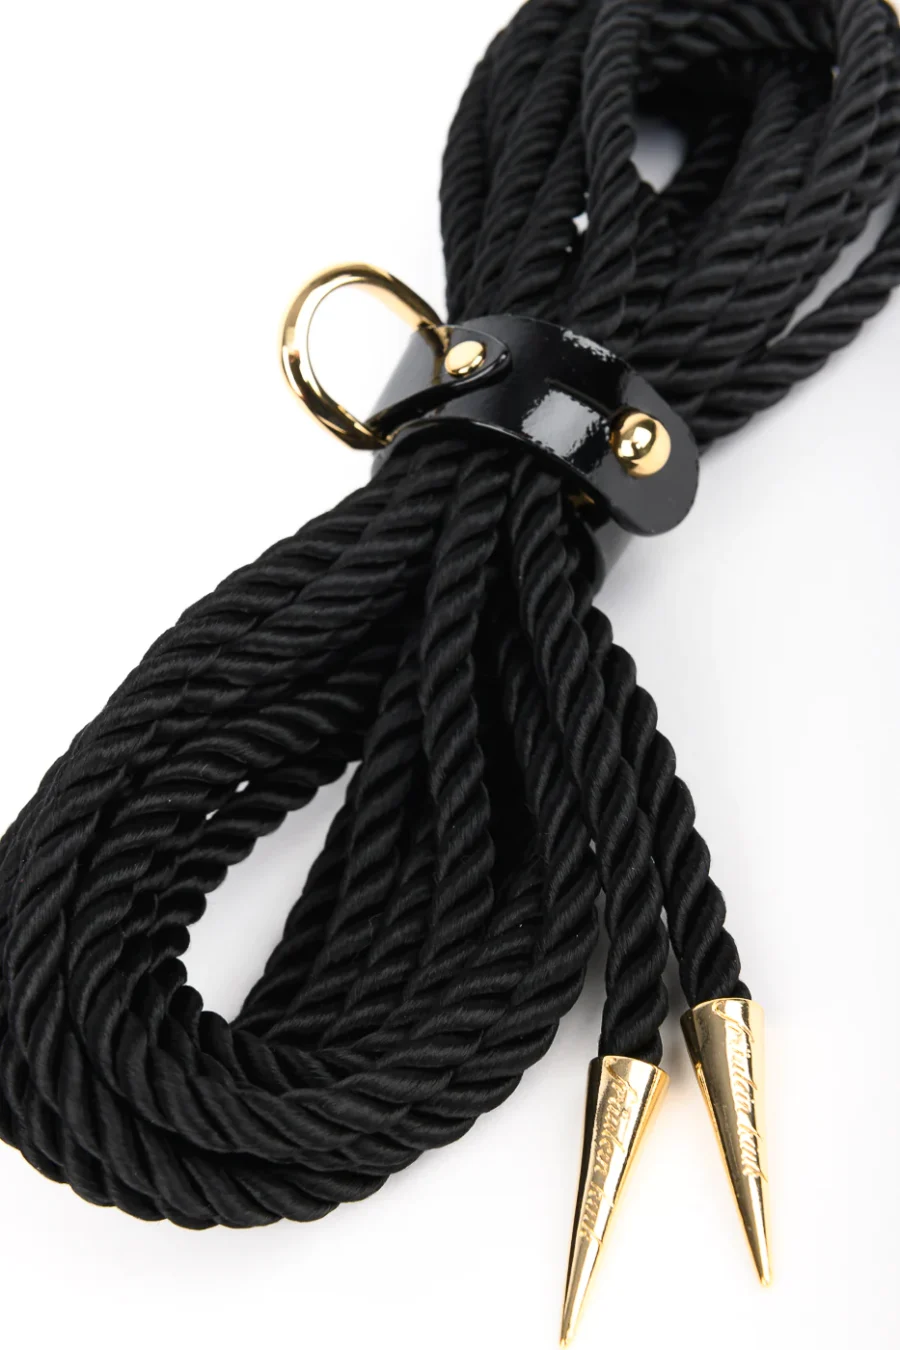 Fraulein Kink Rica Bondage Rope With Spikes